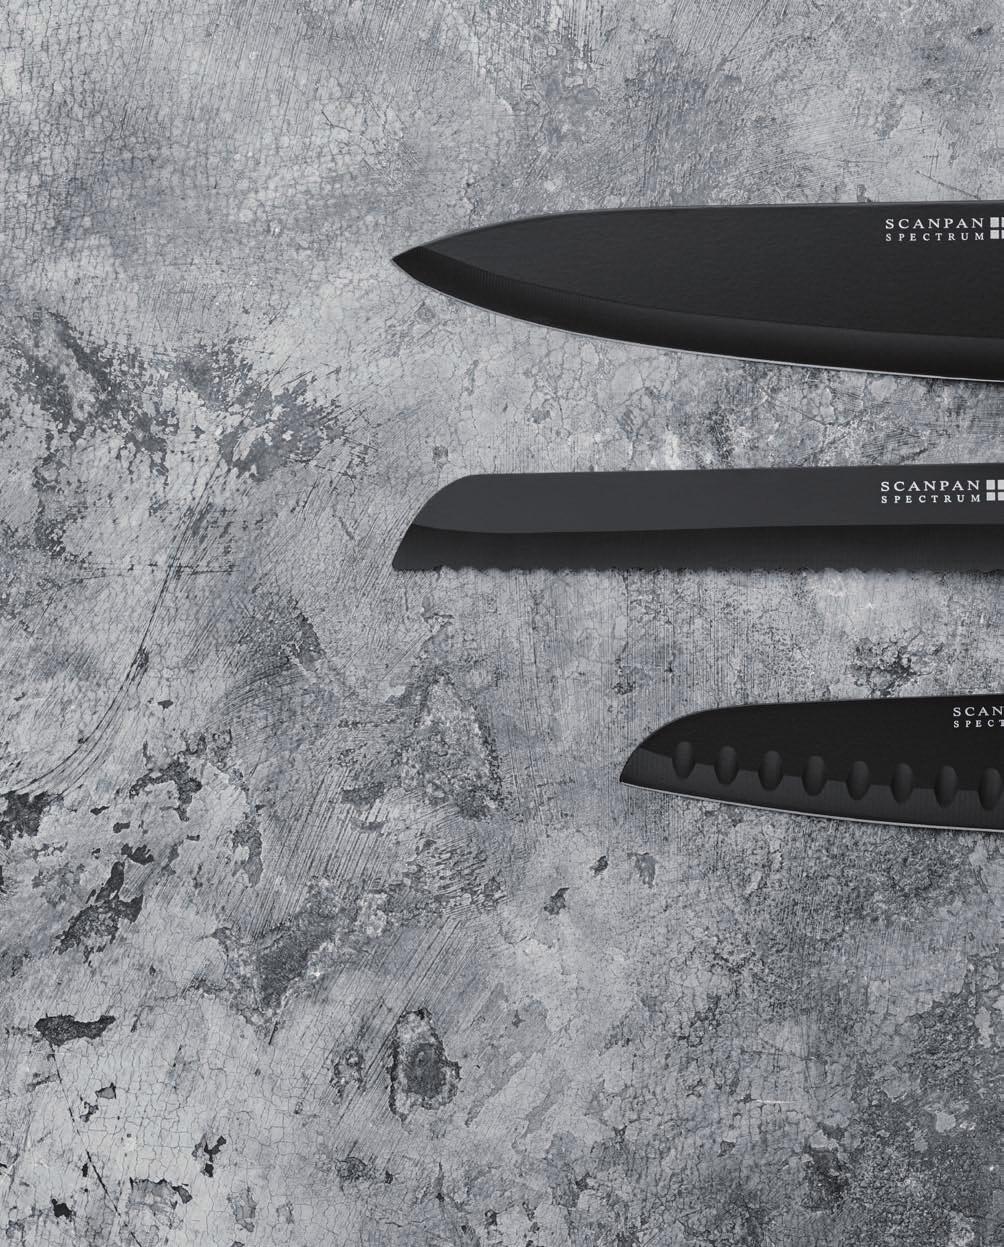 66 Sharp, hand-formed knives are a must in the modern kitchen, all year round. And these best-in-test knives certainly make the cut! The sharp knife blade makes this knife an essential kitchen tool.